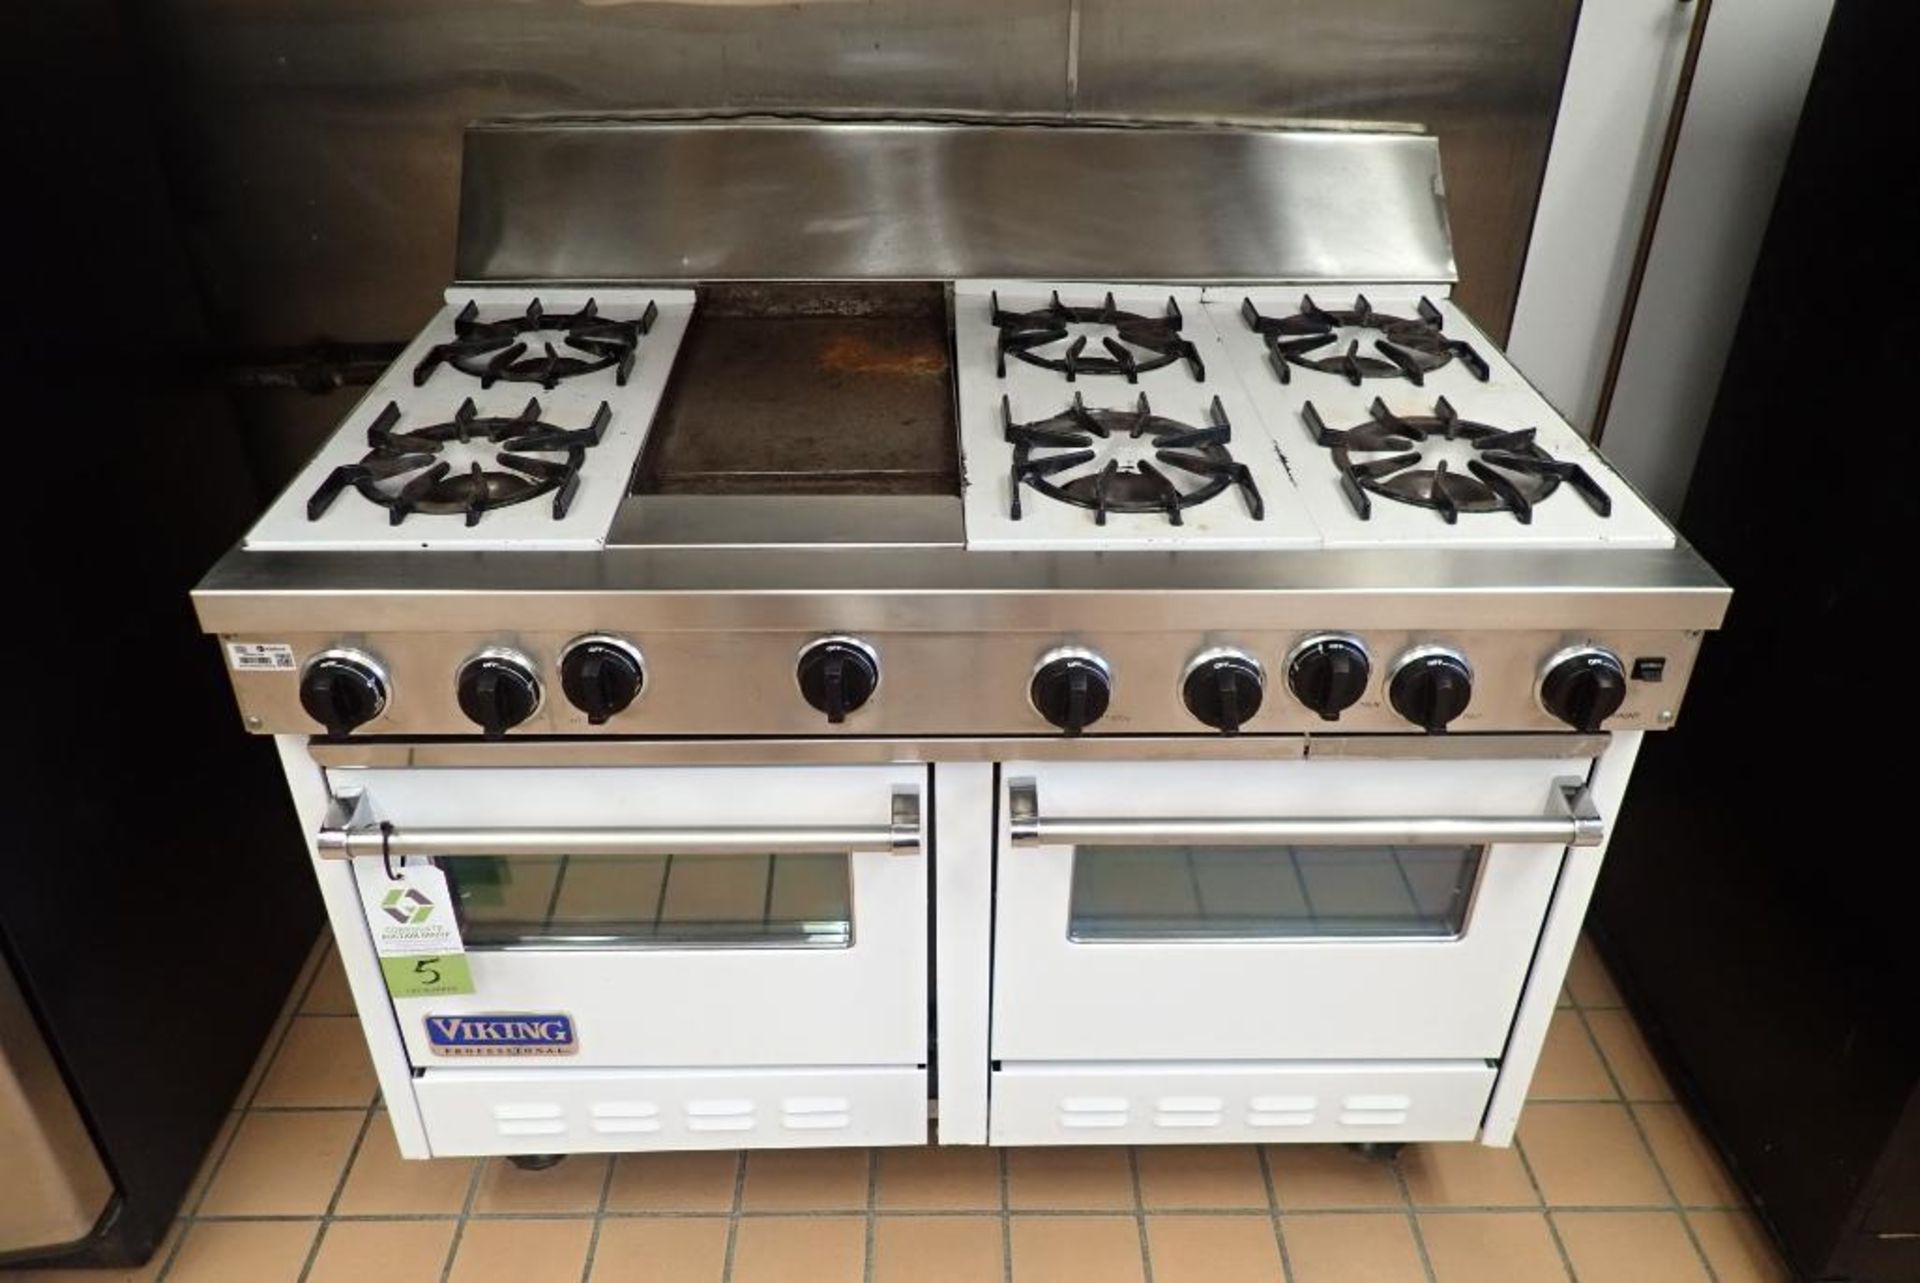 Viking Range on X: Viking delivers professional performance and